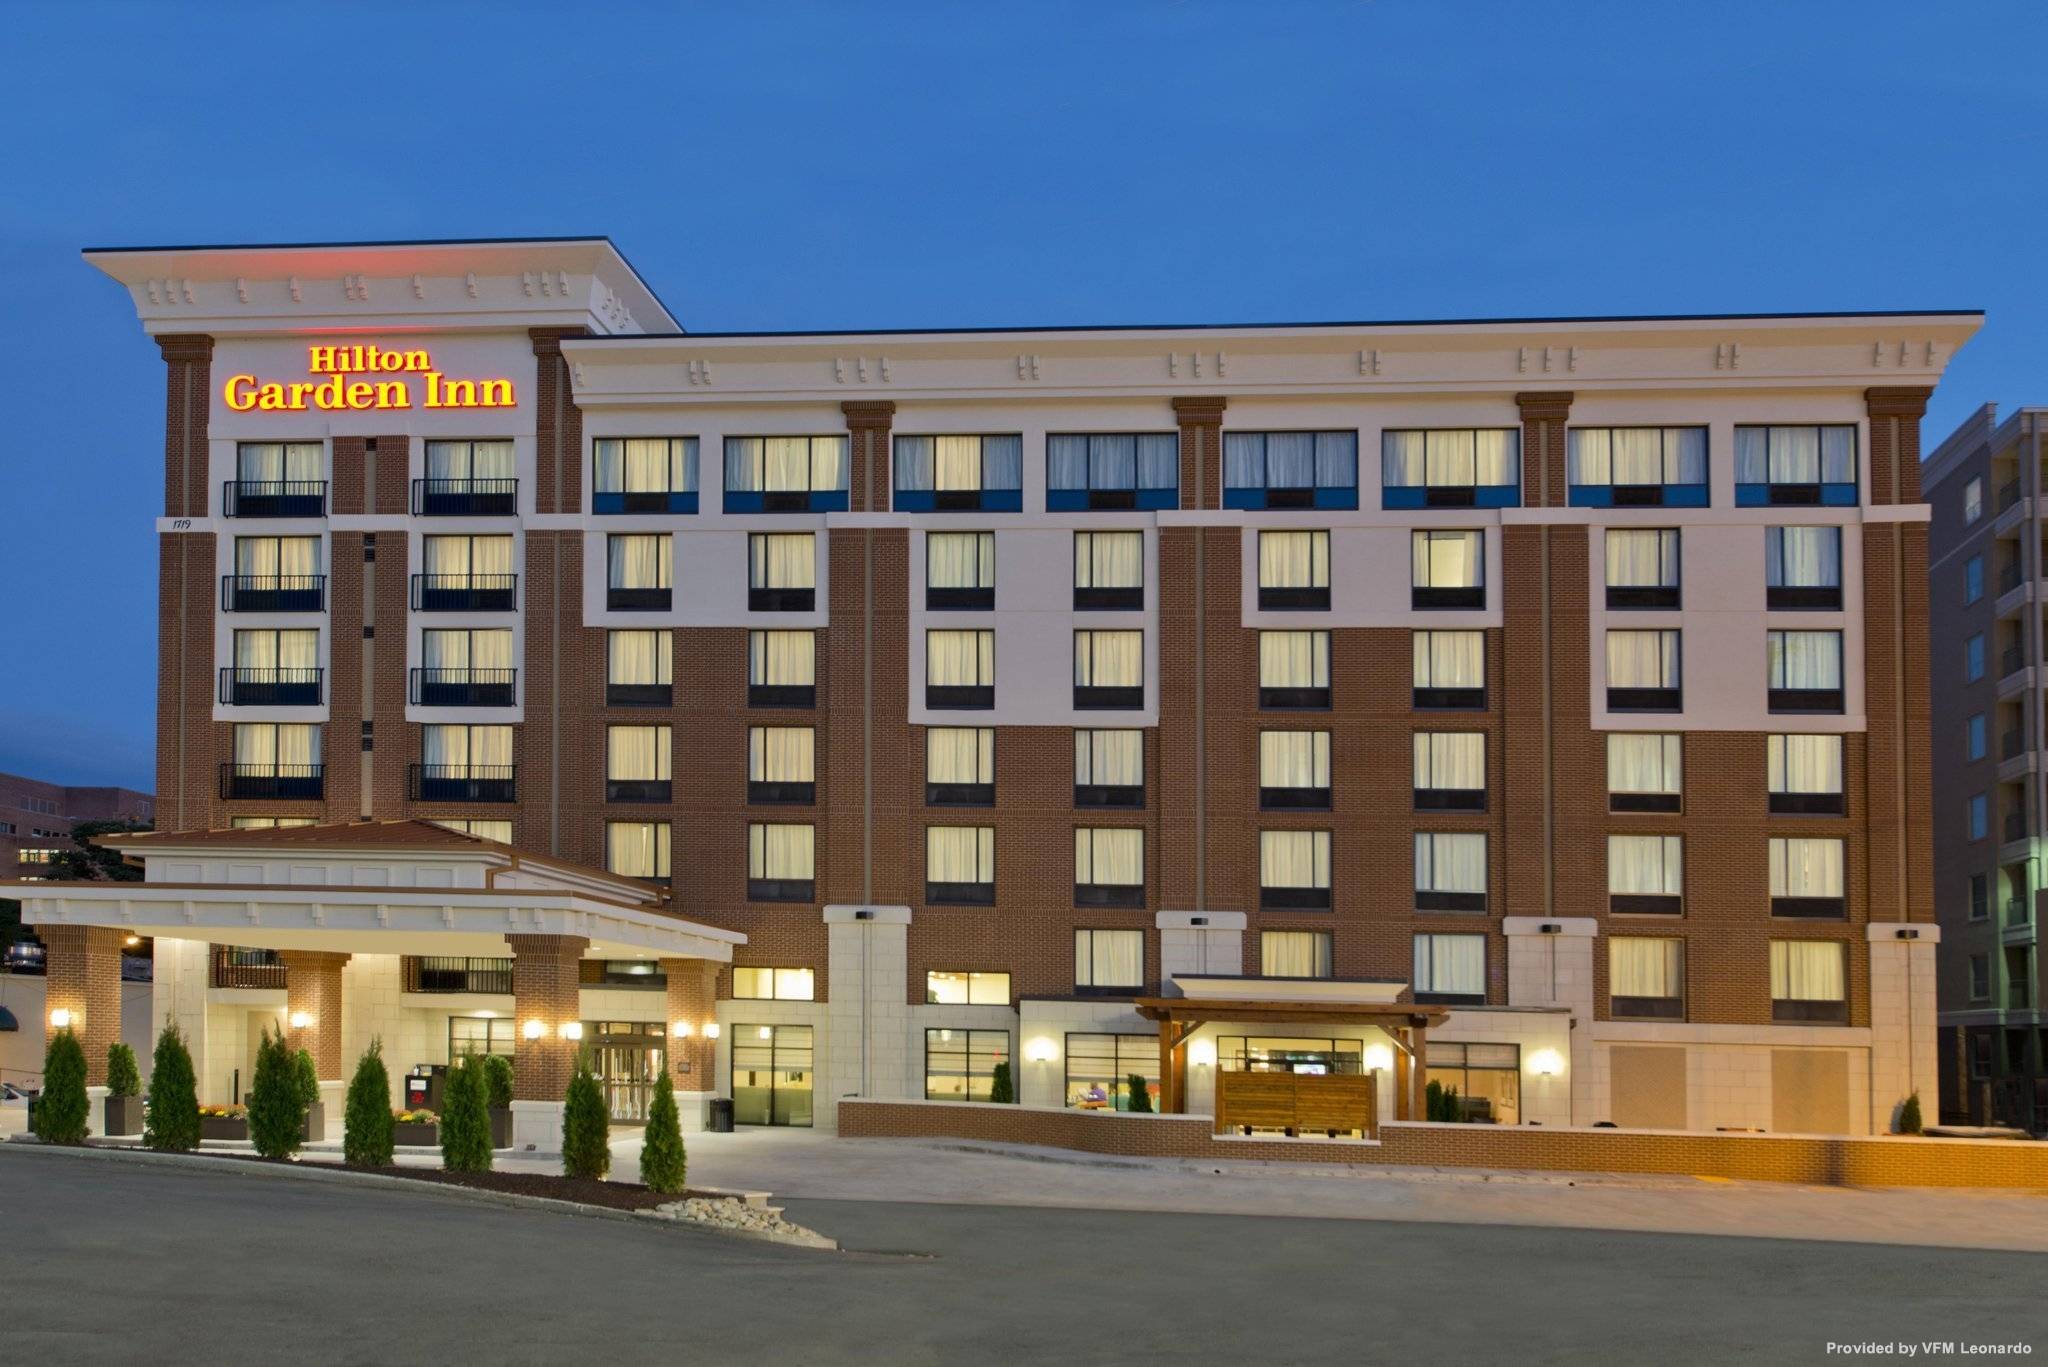 Hotel Graduate Knoxville 3 Hrs Star Hotel In Knoxville Tennessee